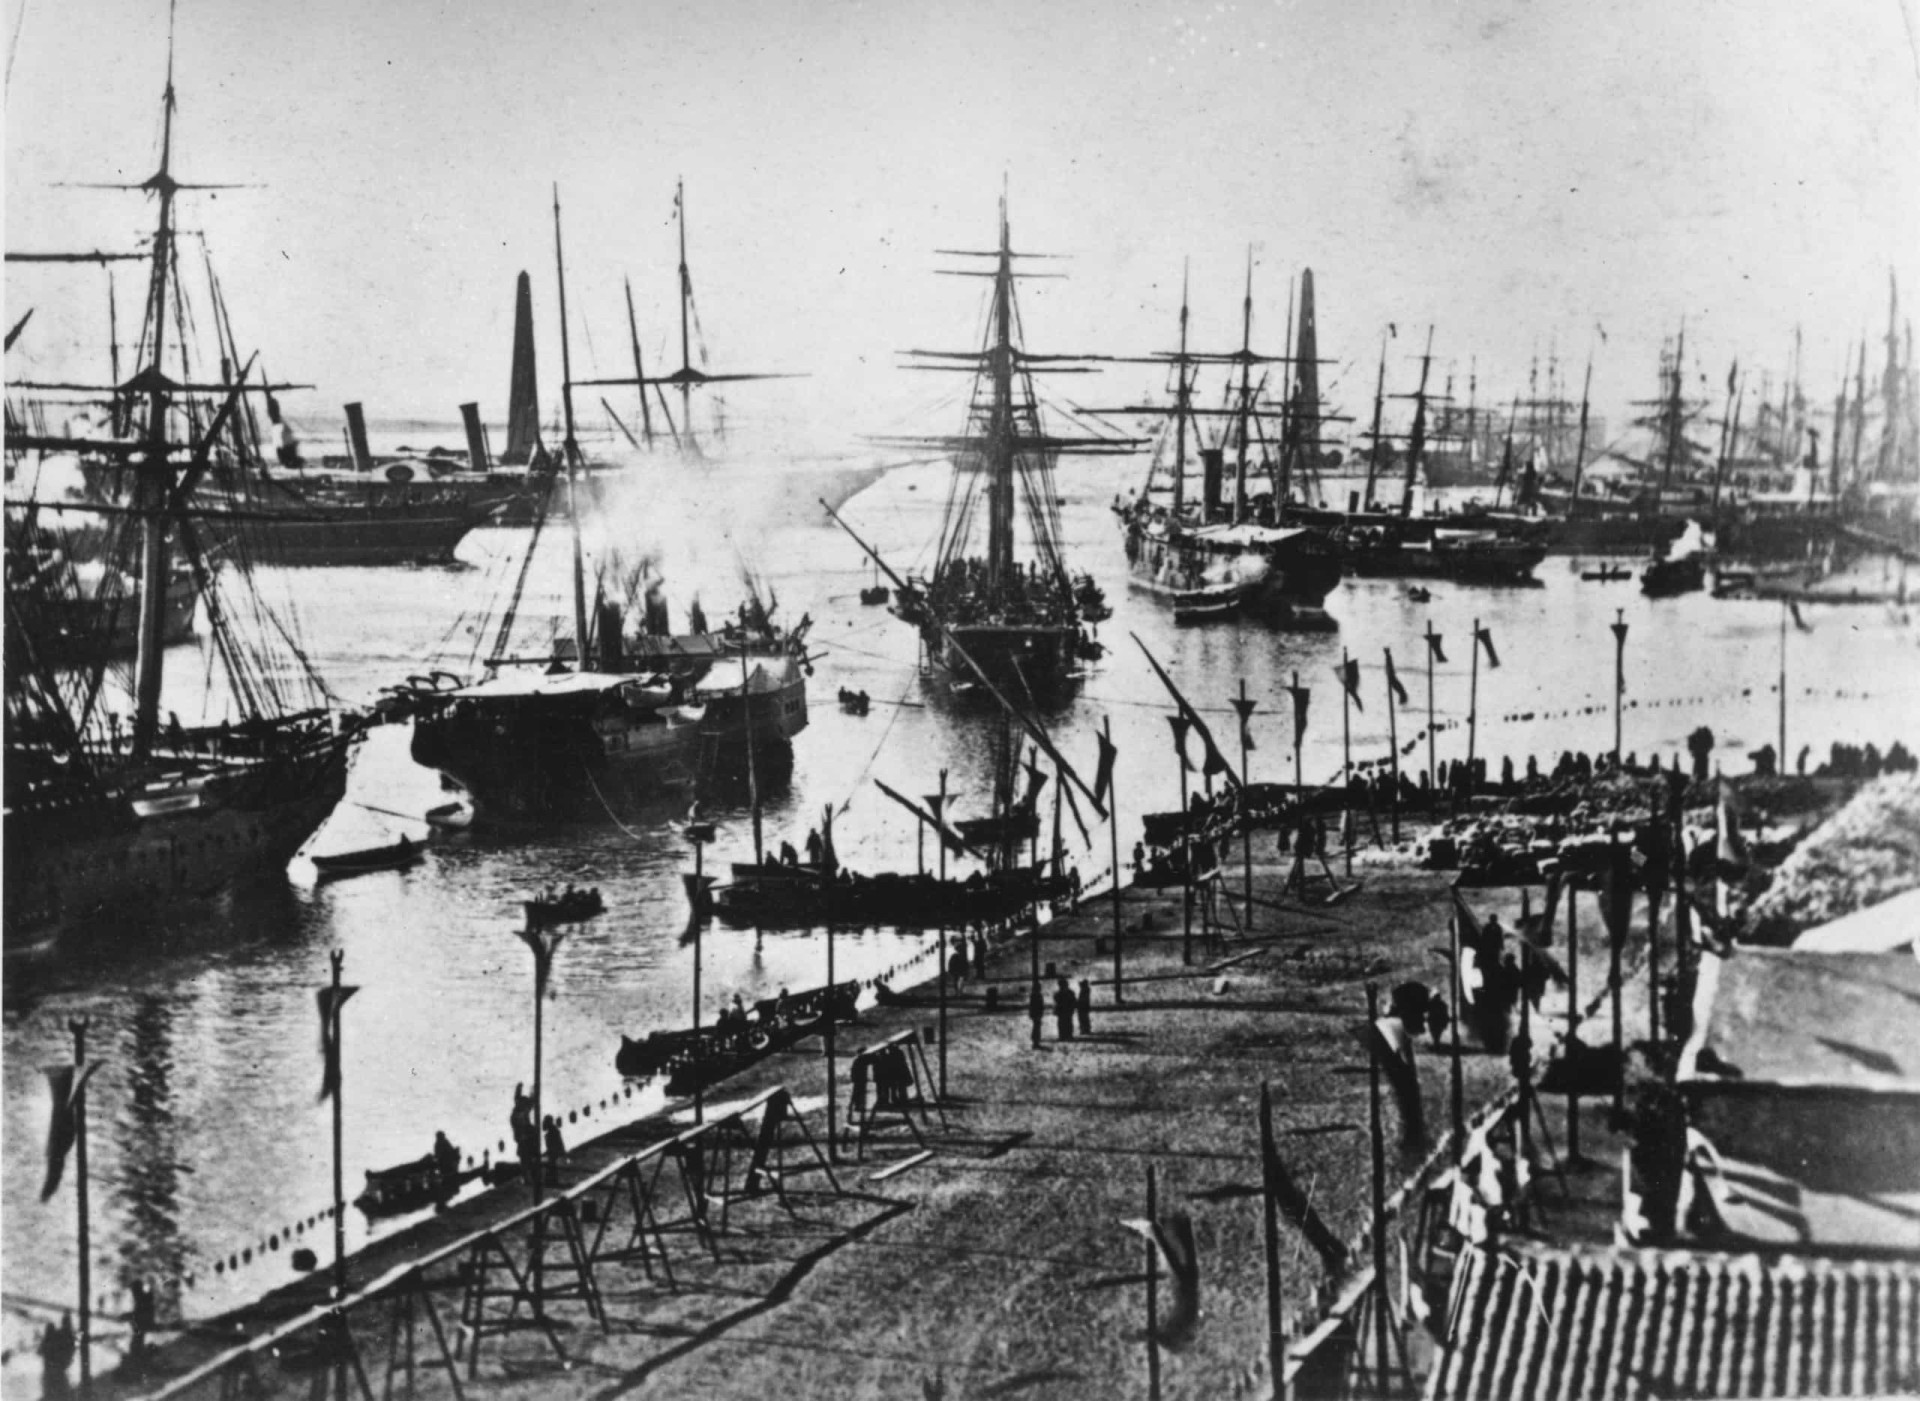 <p>On the morning of November 17, a fleet of ships entered the canal for an inaugural procession of steam and sail.</p>